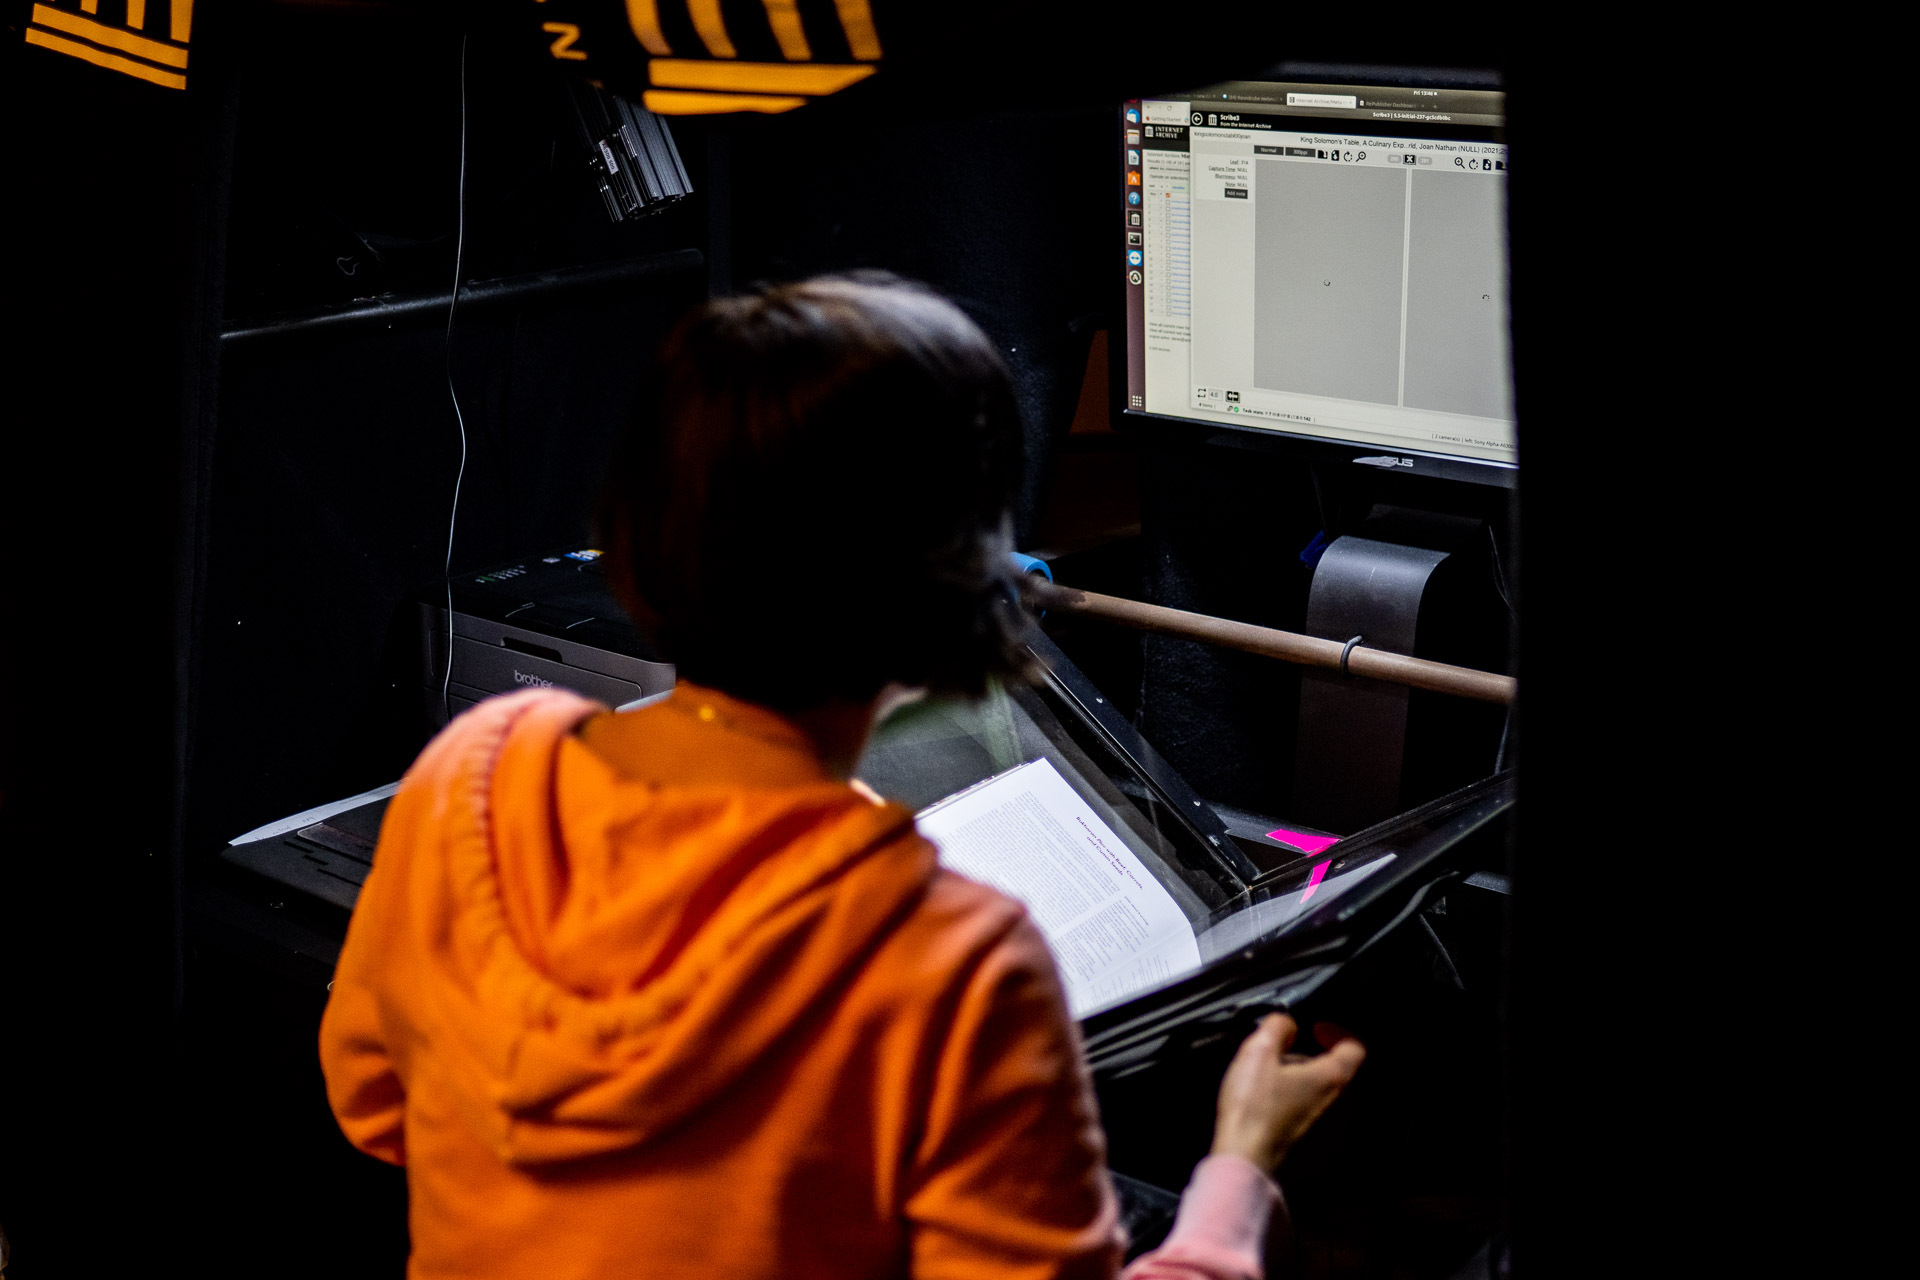 Someone wearing a bright orange hoodie sits at an archiving station holding an open book and facing a computer screen